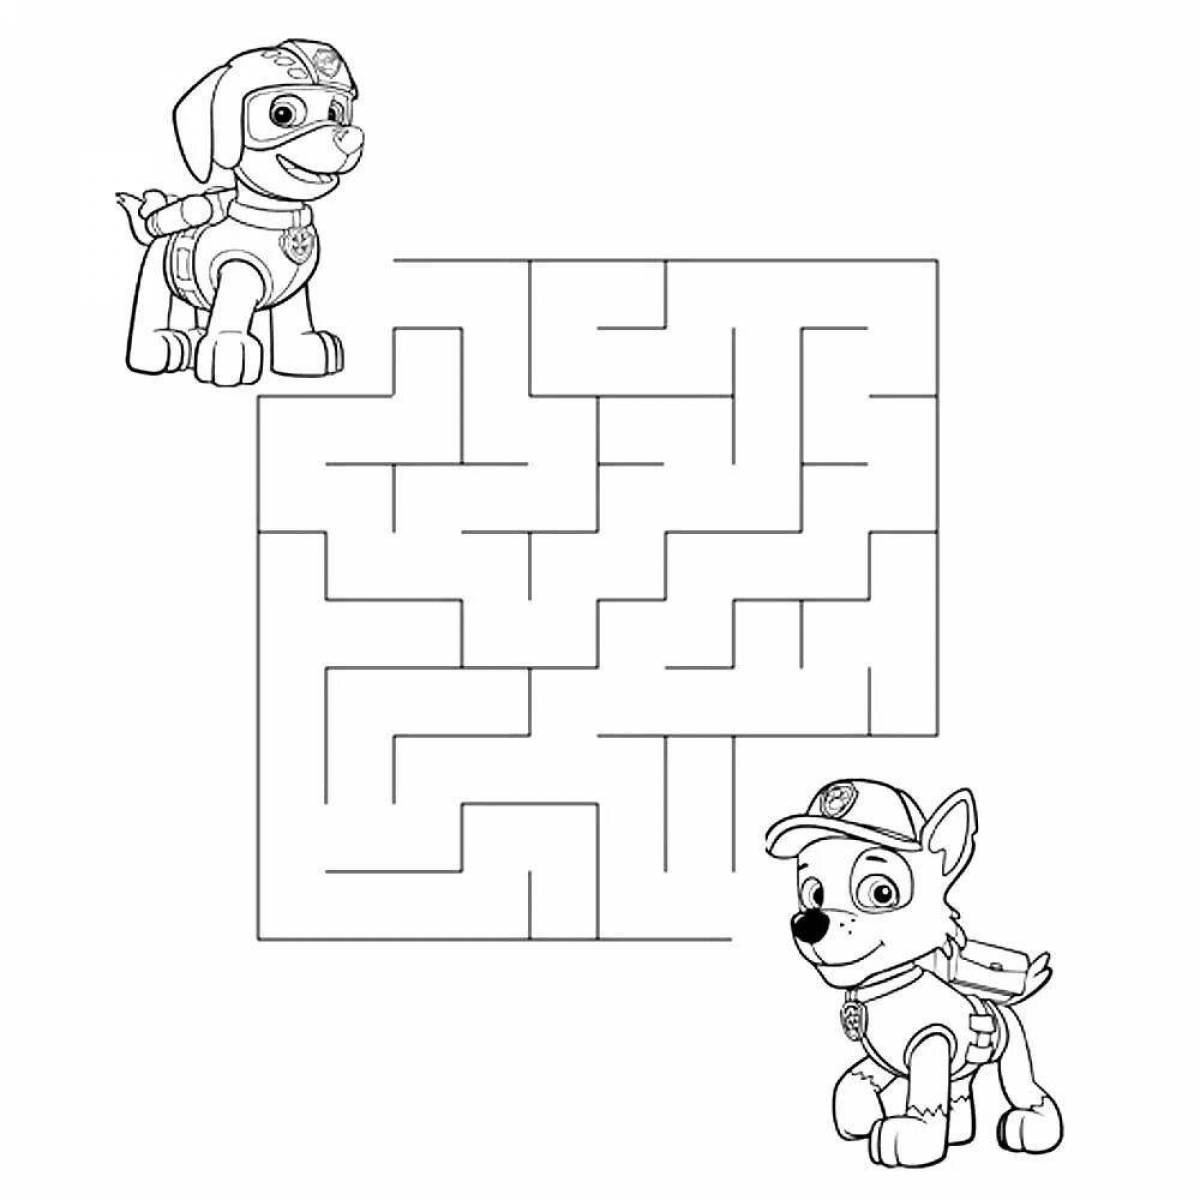 Complex maze coloring book for kids